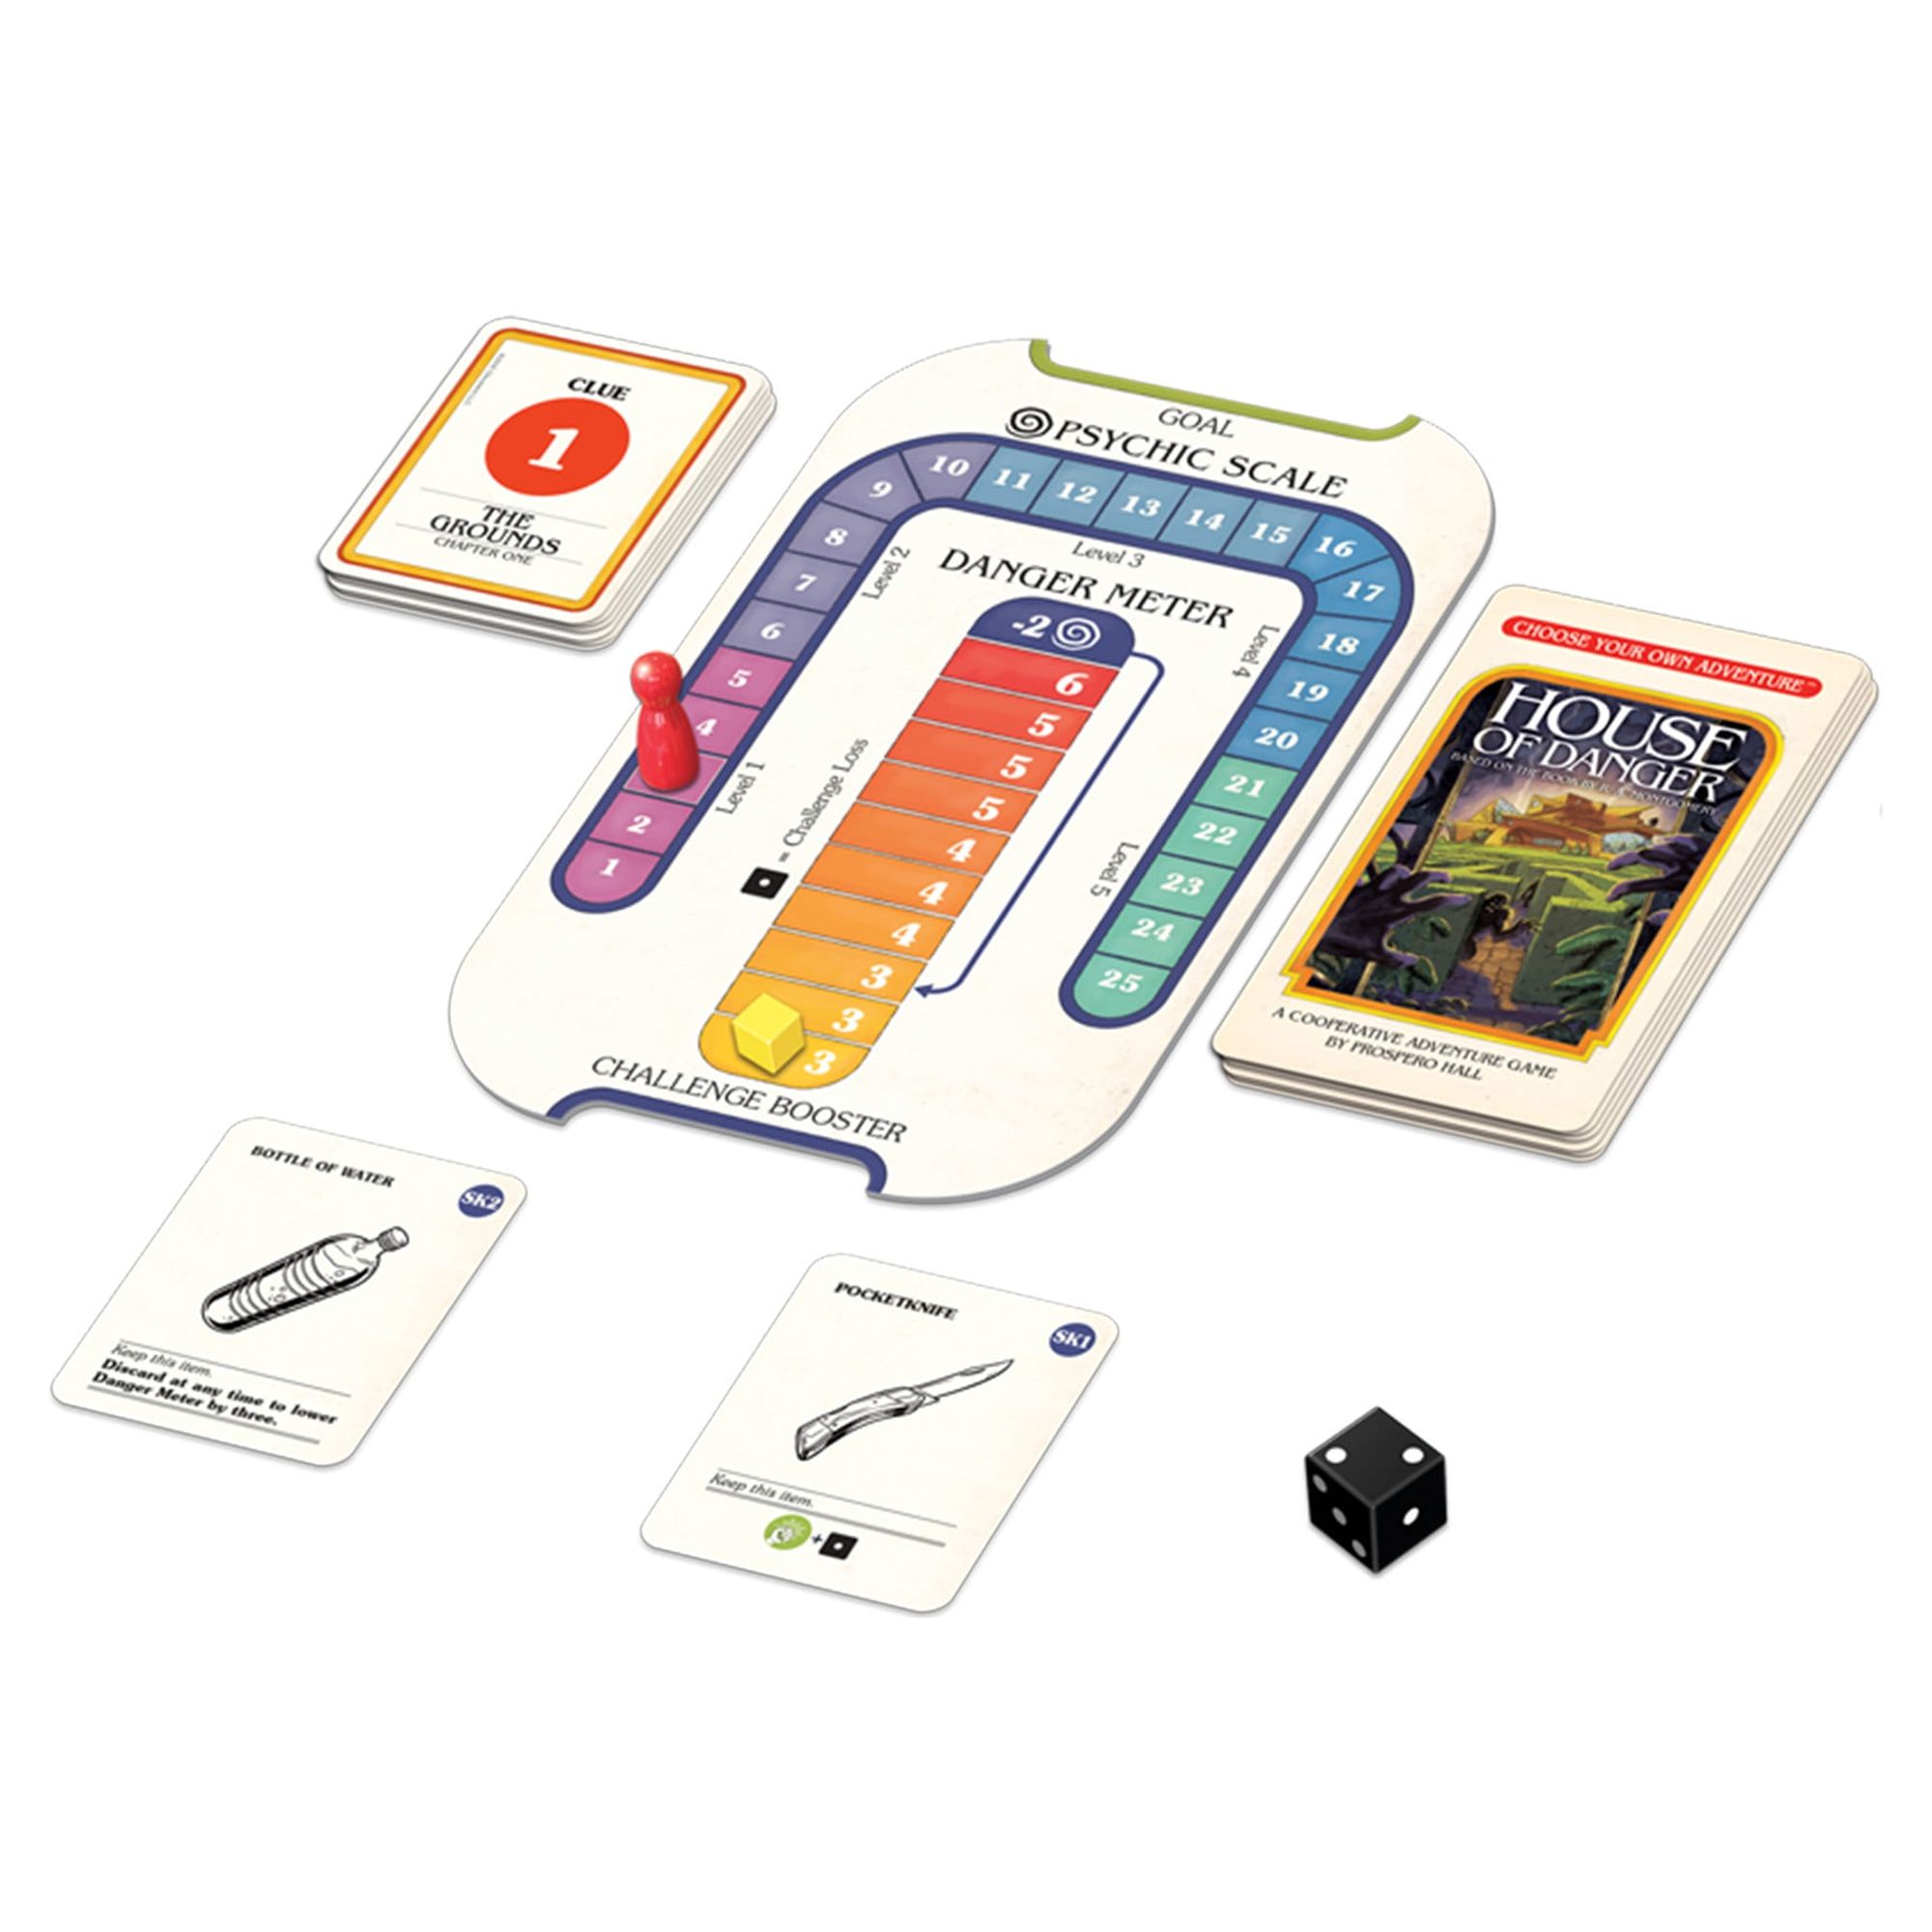 Choose Your Own Adventure: House of Danger Narrative Board Game for Ages 10 and up, from Asmodee - image 3 of 6